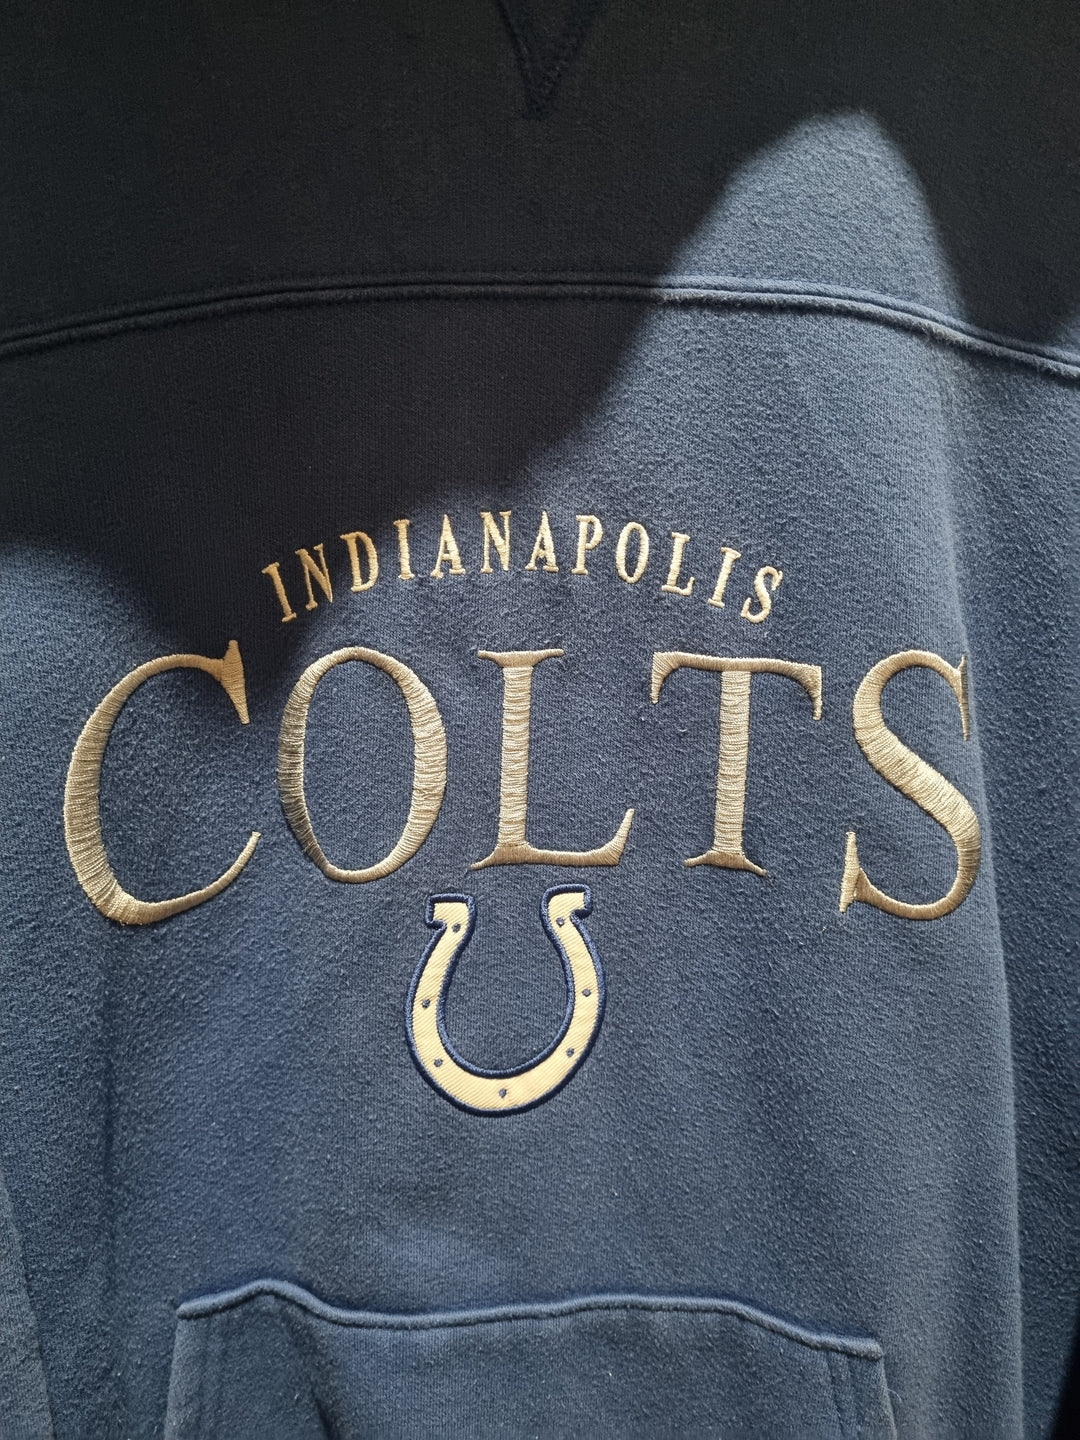 Indianapolis Colts NFL Apparal Hoodie XL